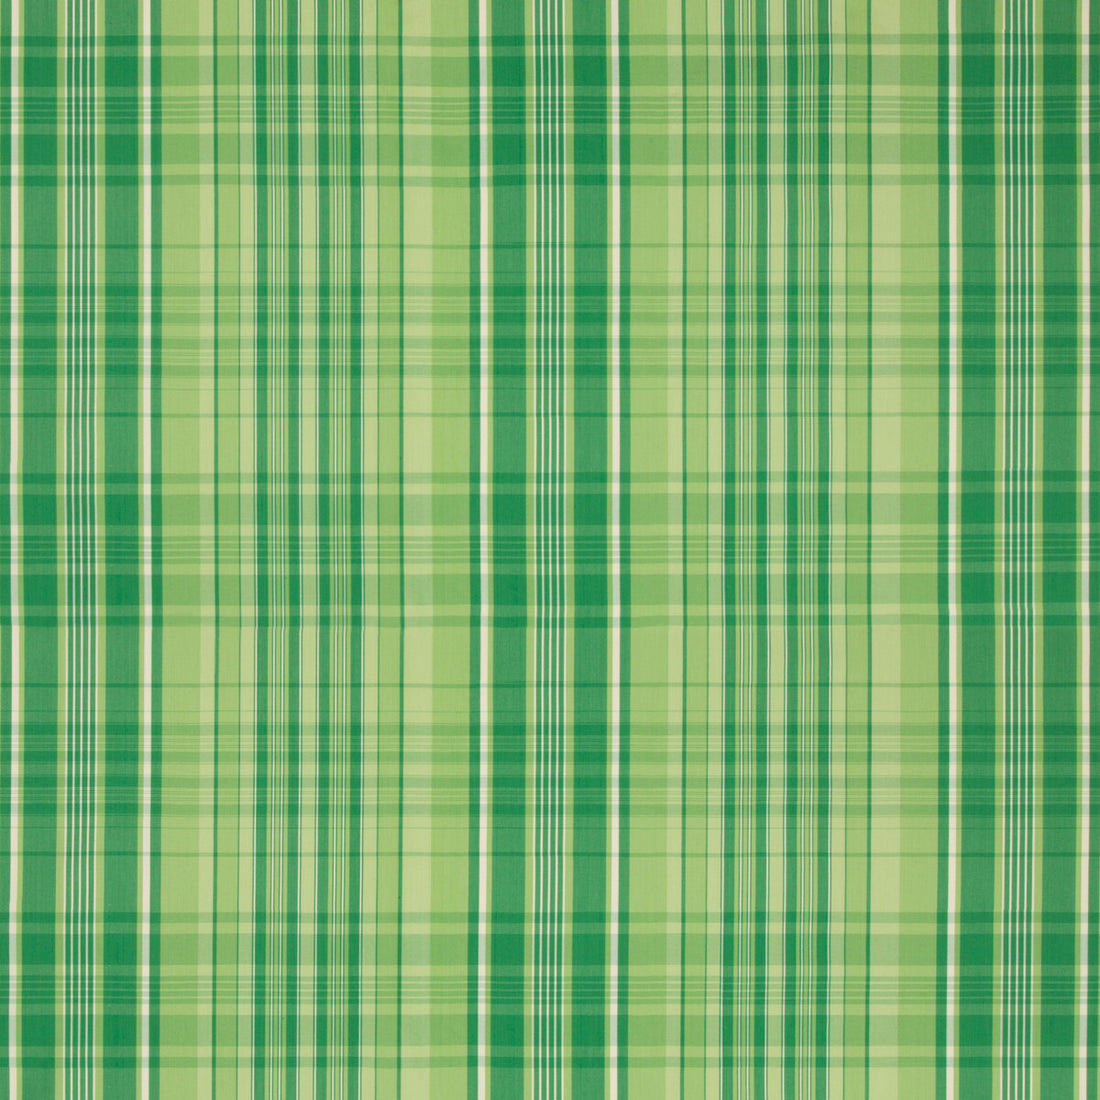 Guernsey Check fabric in kiwi color - pattern 8019101.3.0 - by Brunschwig &amp; Fils in the Normant Checks And Stripes collection